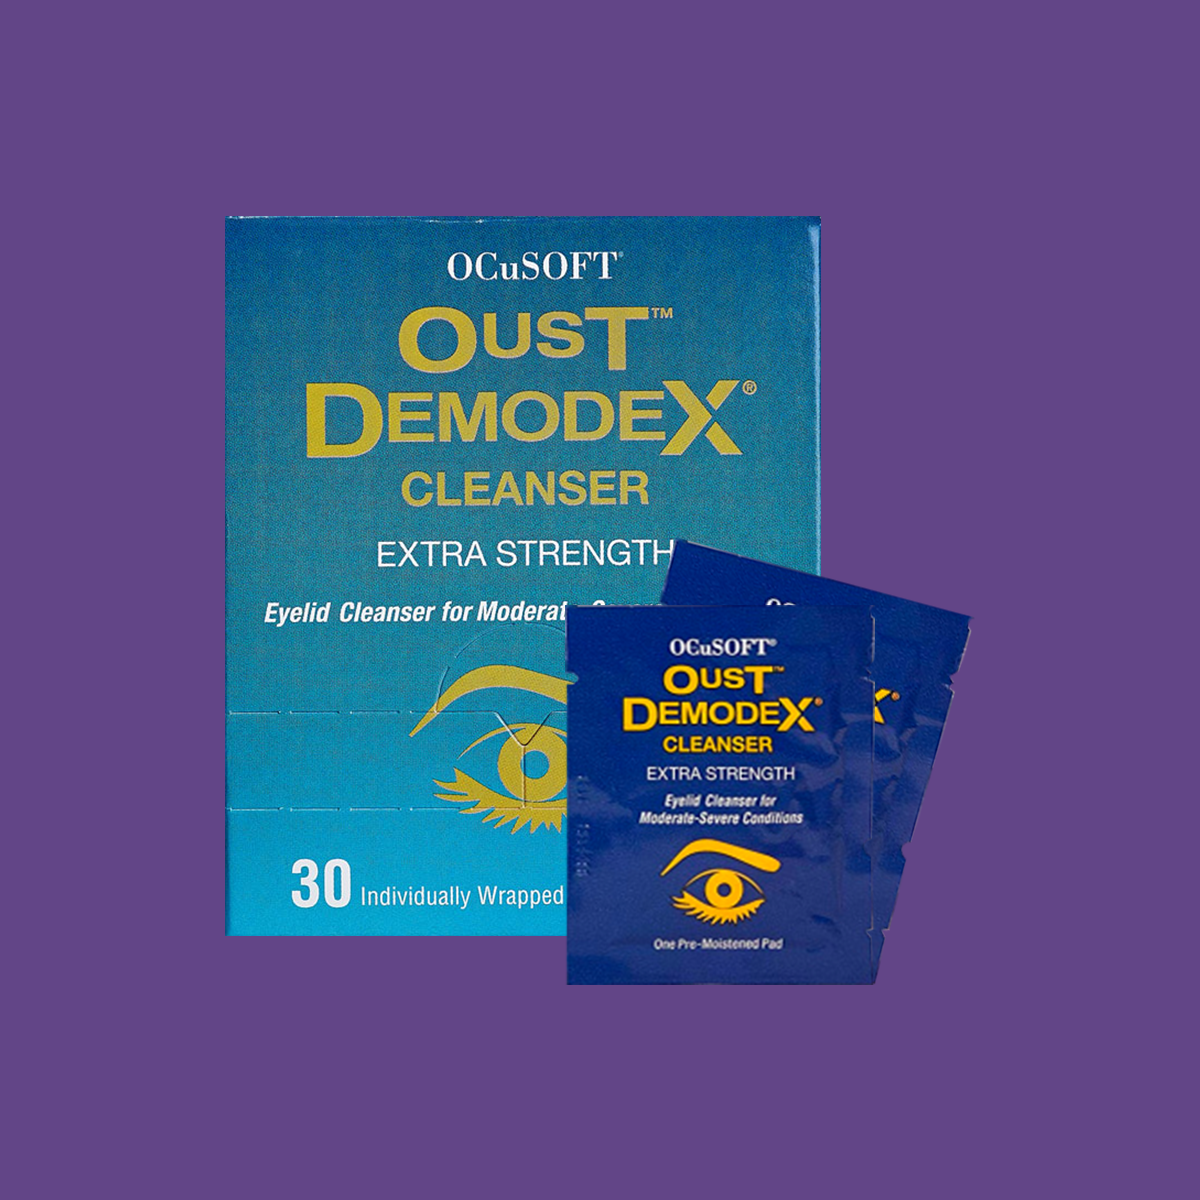 OCuSOFT Oust Demodex Cleanser Pre-Moistened Pads (30ct)